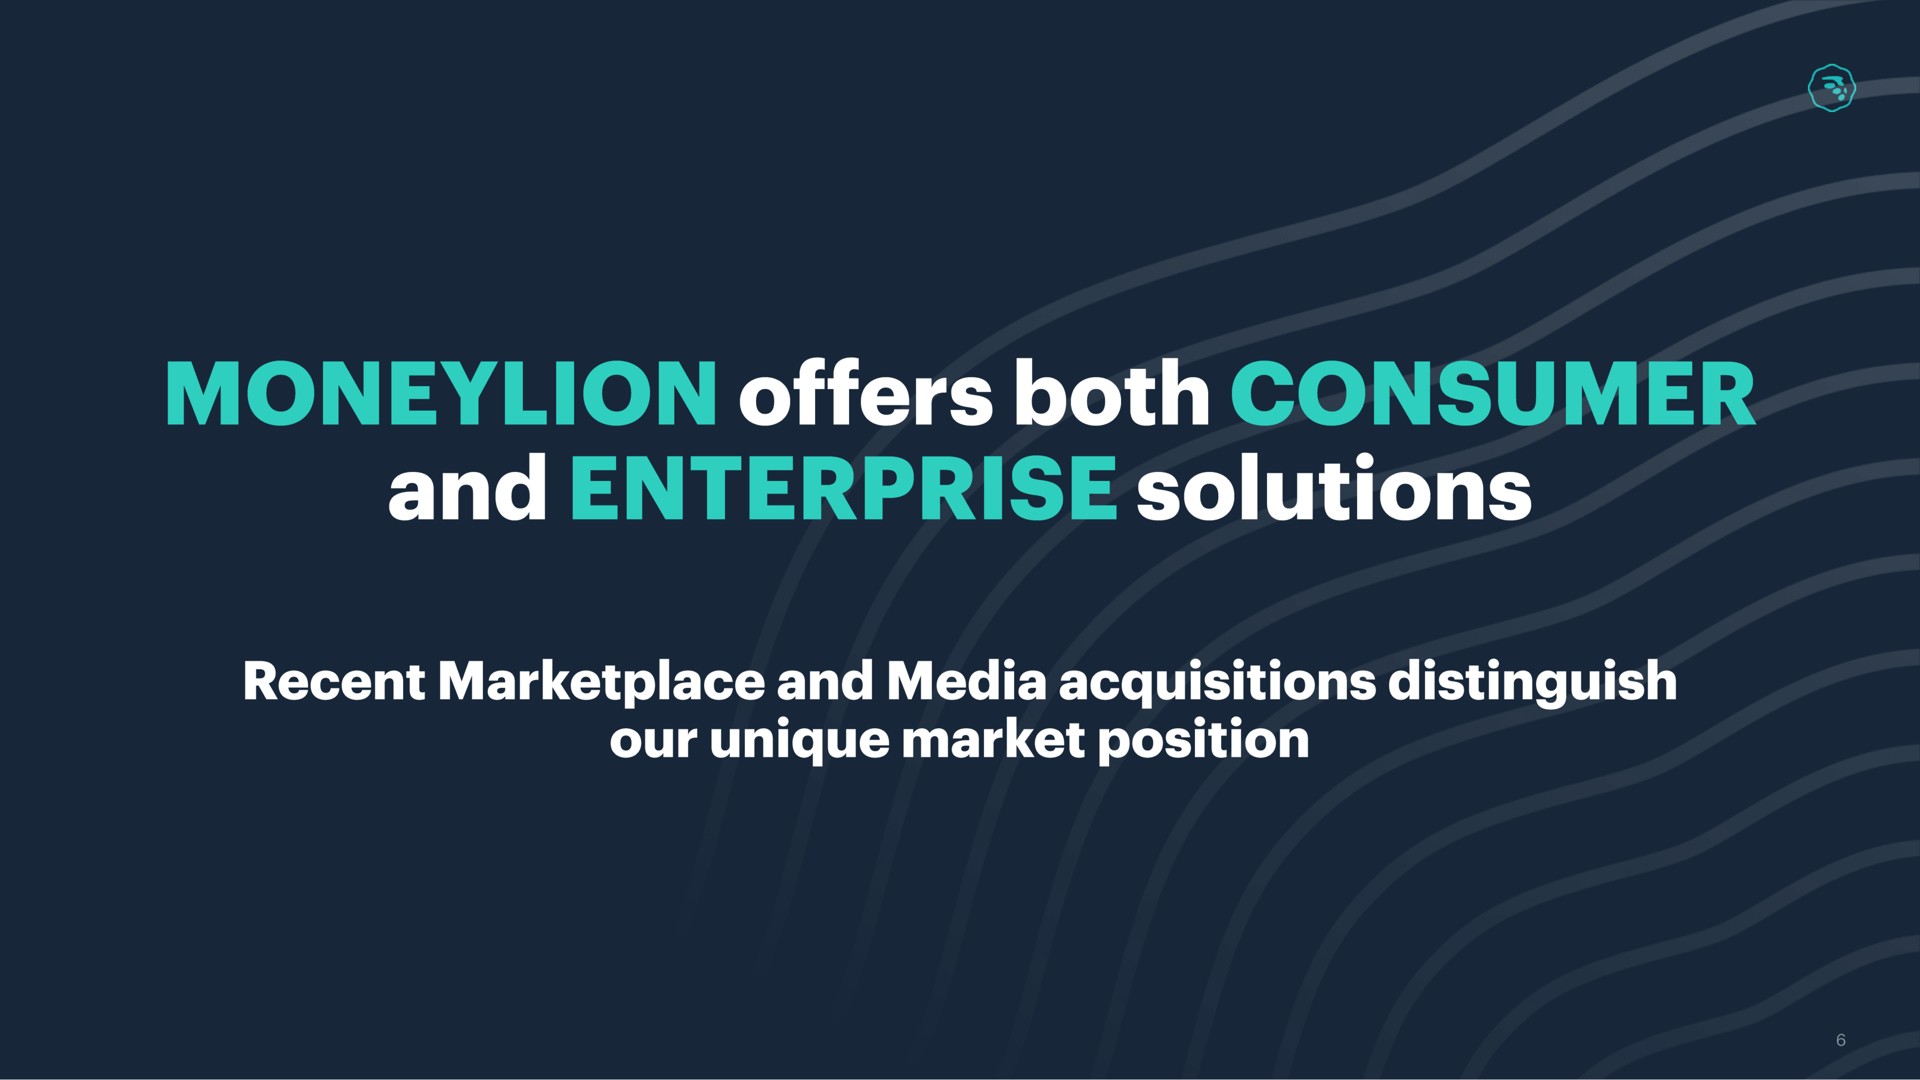 offers both consumer and enterprise solutions recent and media acquisitions distinguish our unique market position | MoneyLion